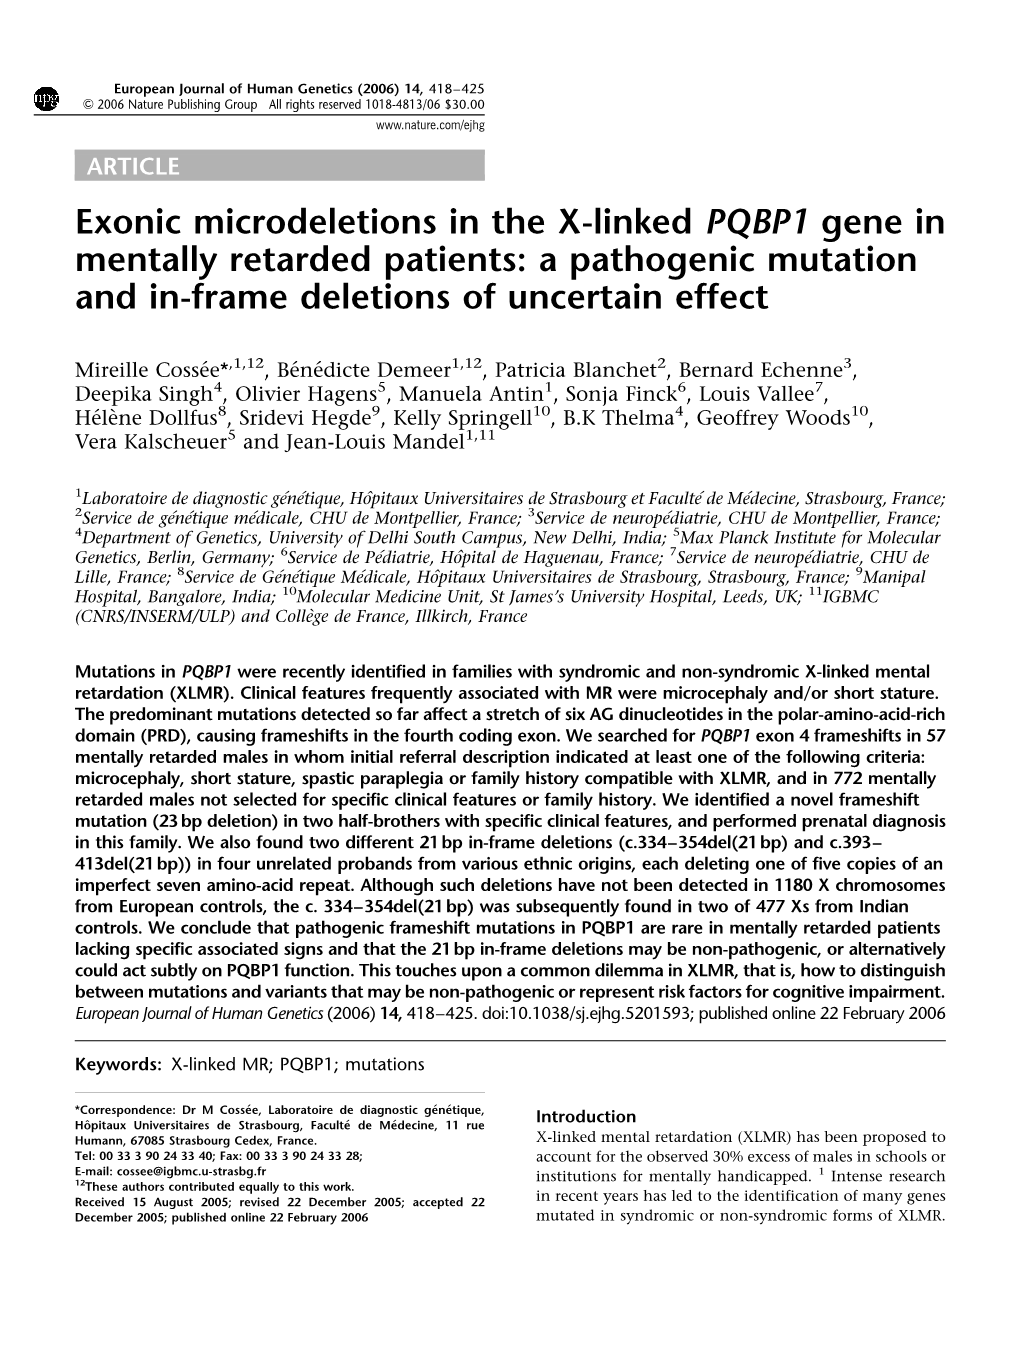 Exonic Microdeletions in the X-Linked PQBP1 Gene in Mentally Retarded Patients: a Pathogenic Mutation and In-Frame Deletions of Uncertain Effect